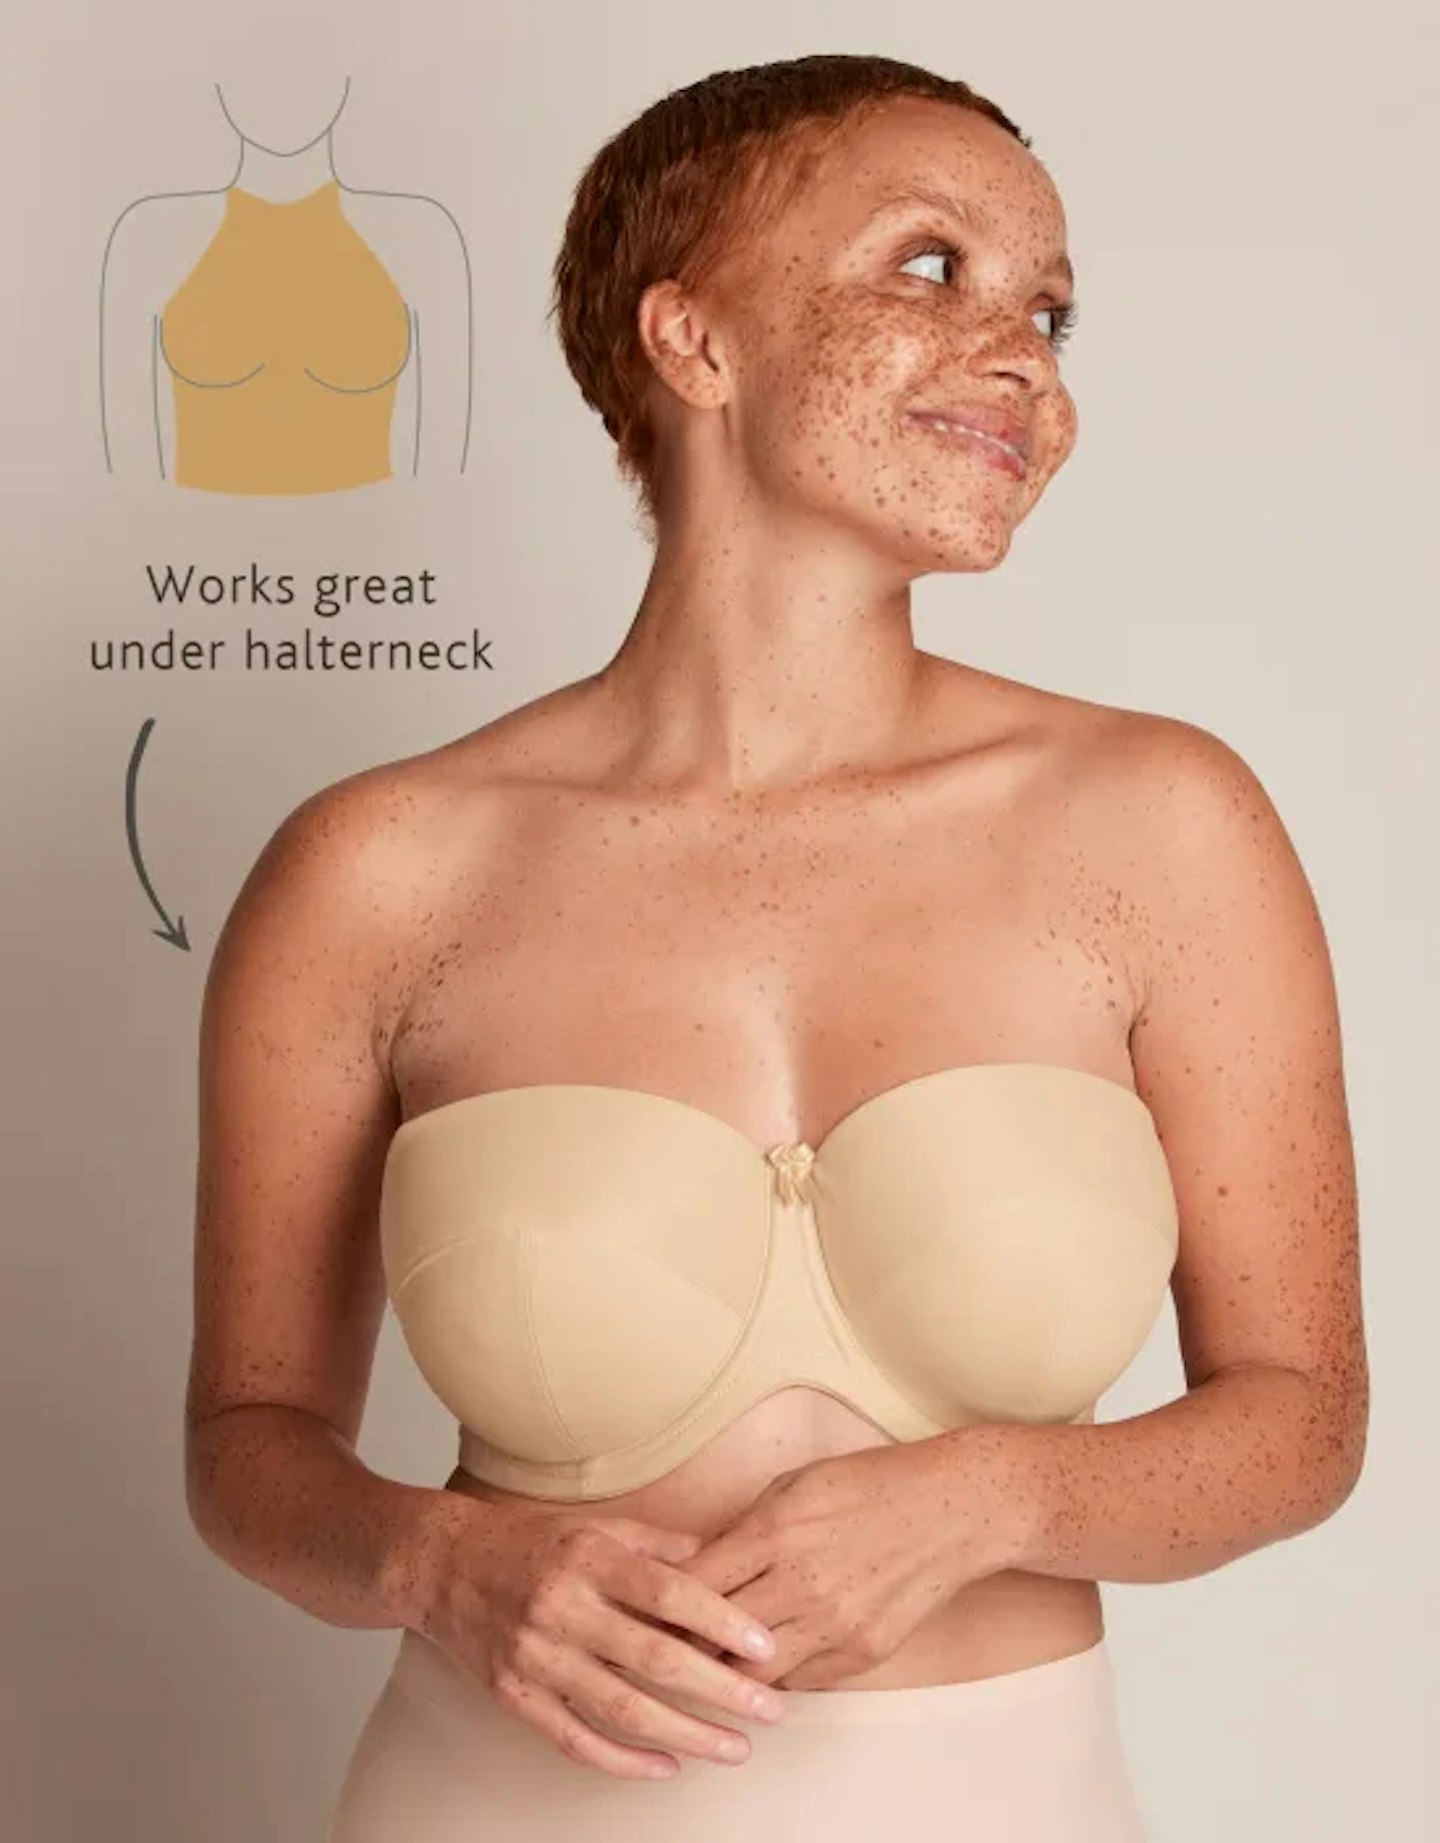 How To Find The Right Bra